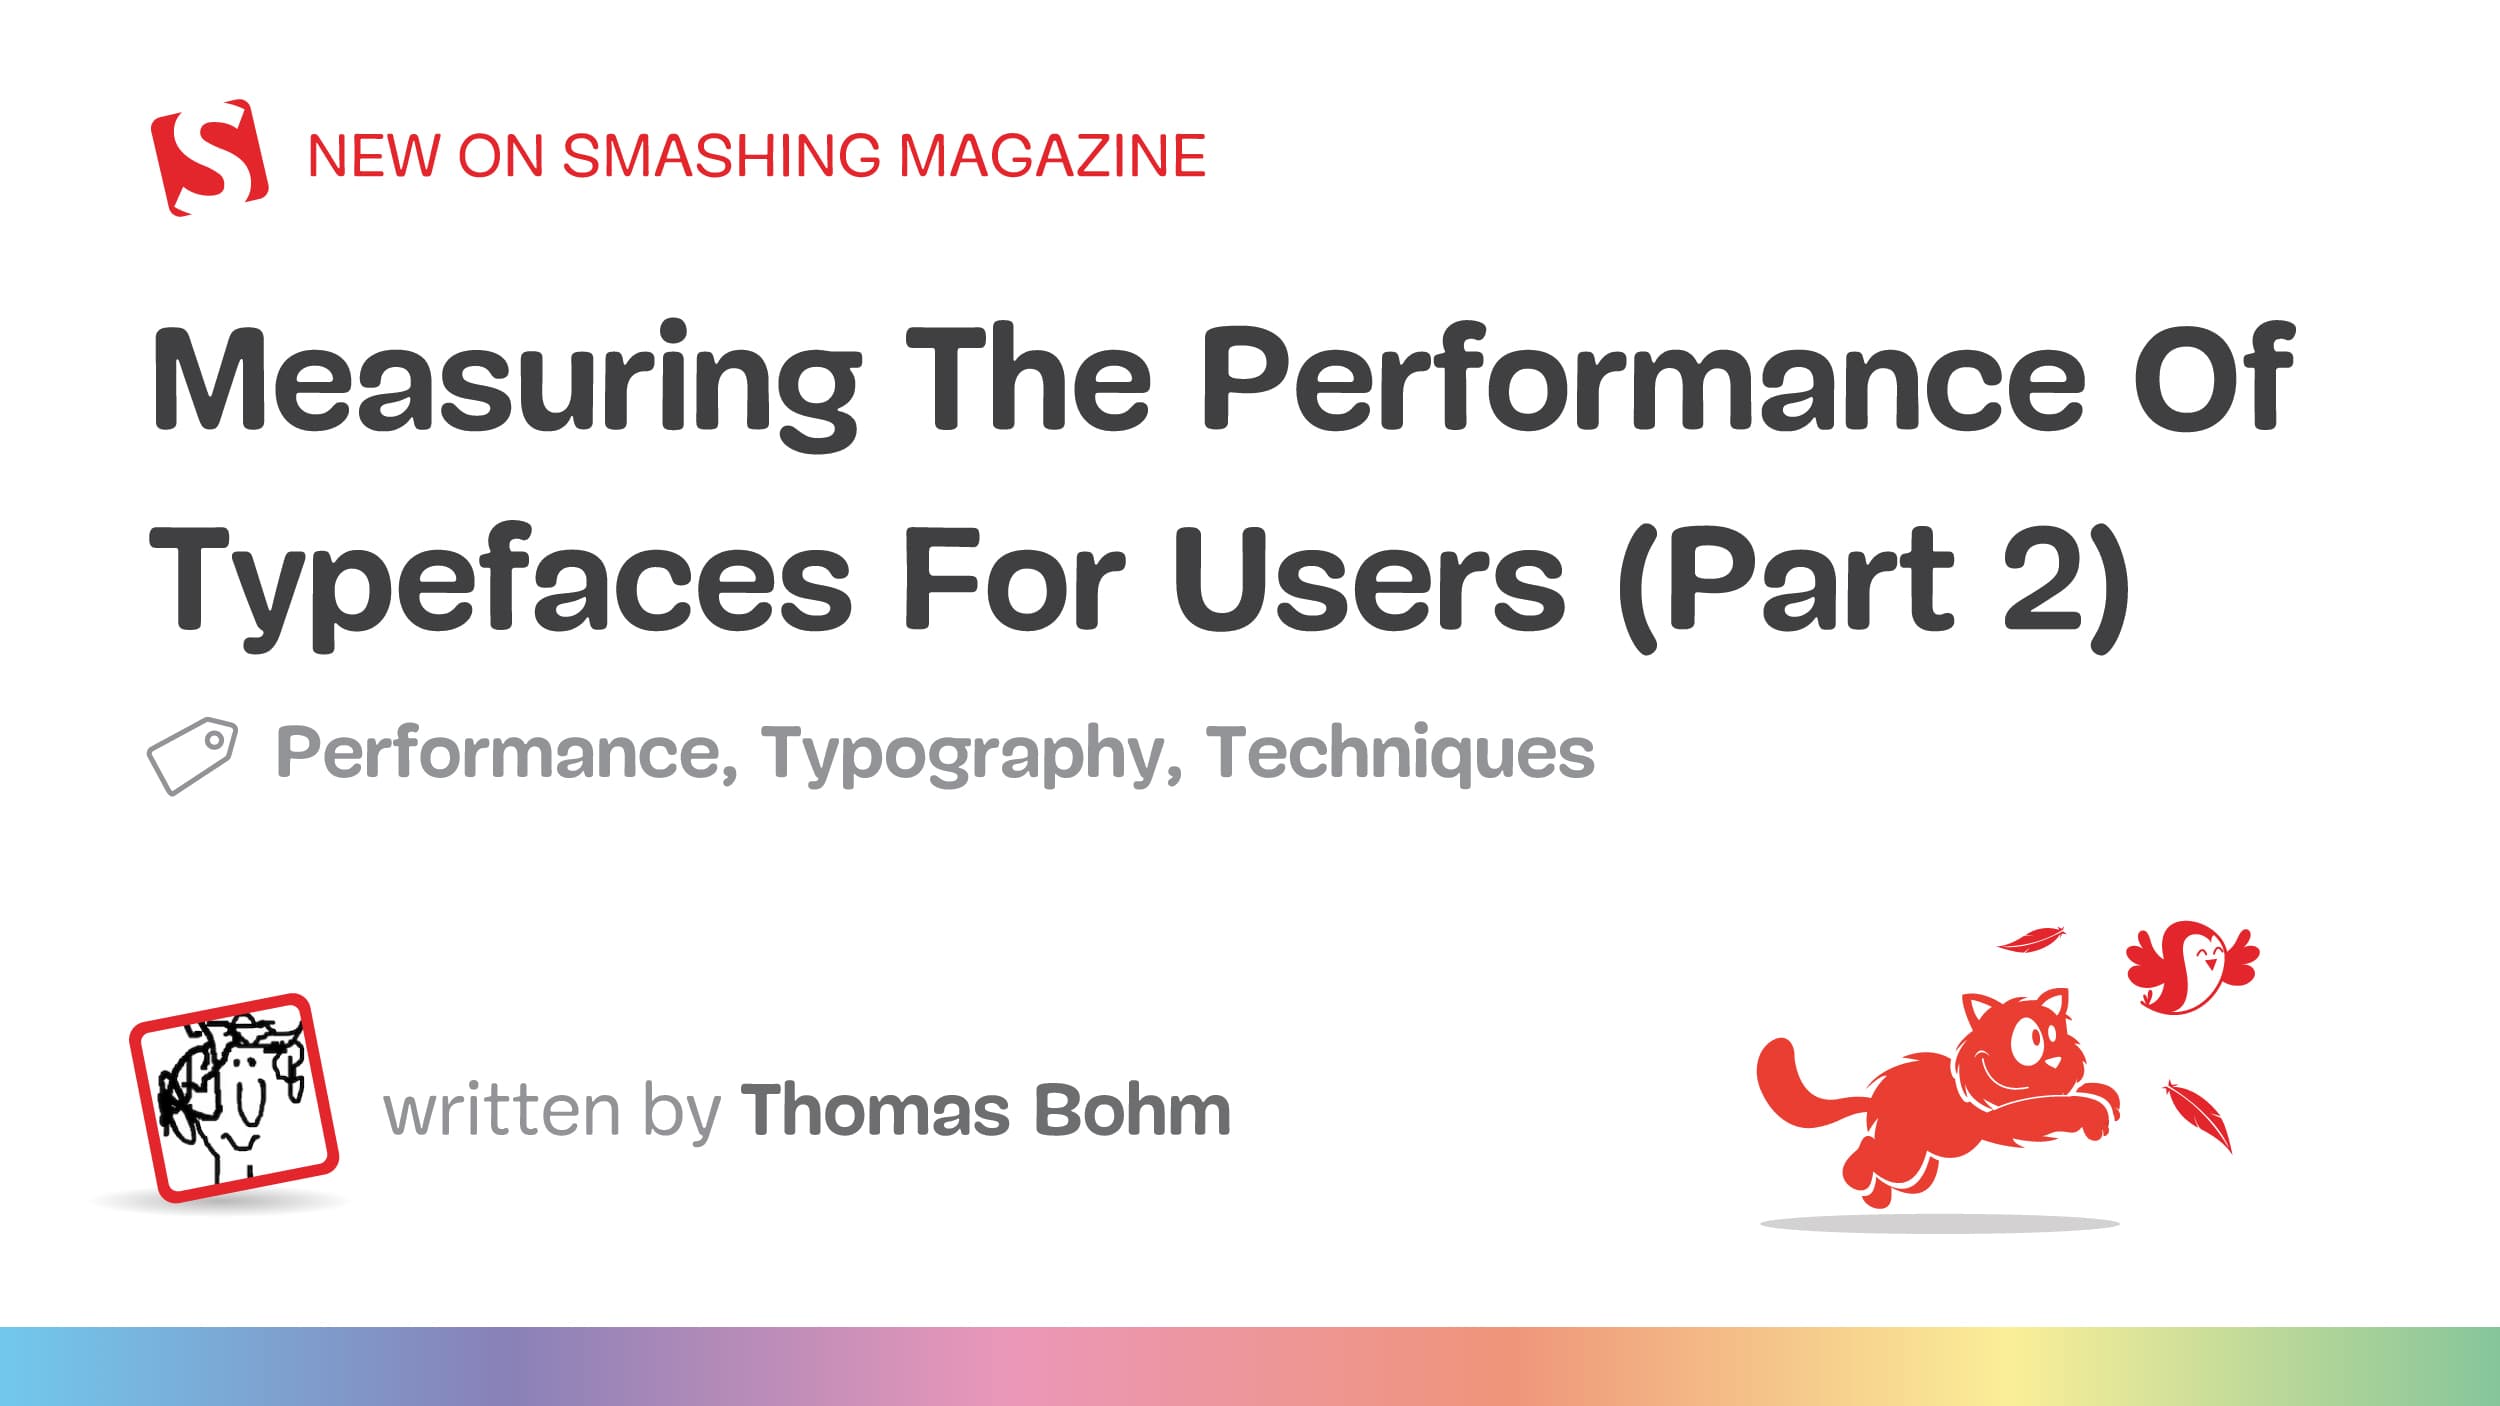 Measuring The Performance Of Typefaces For Users (Part 2)